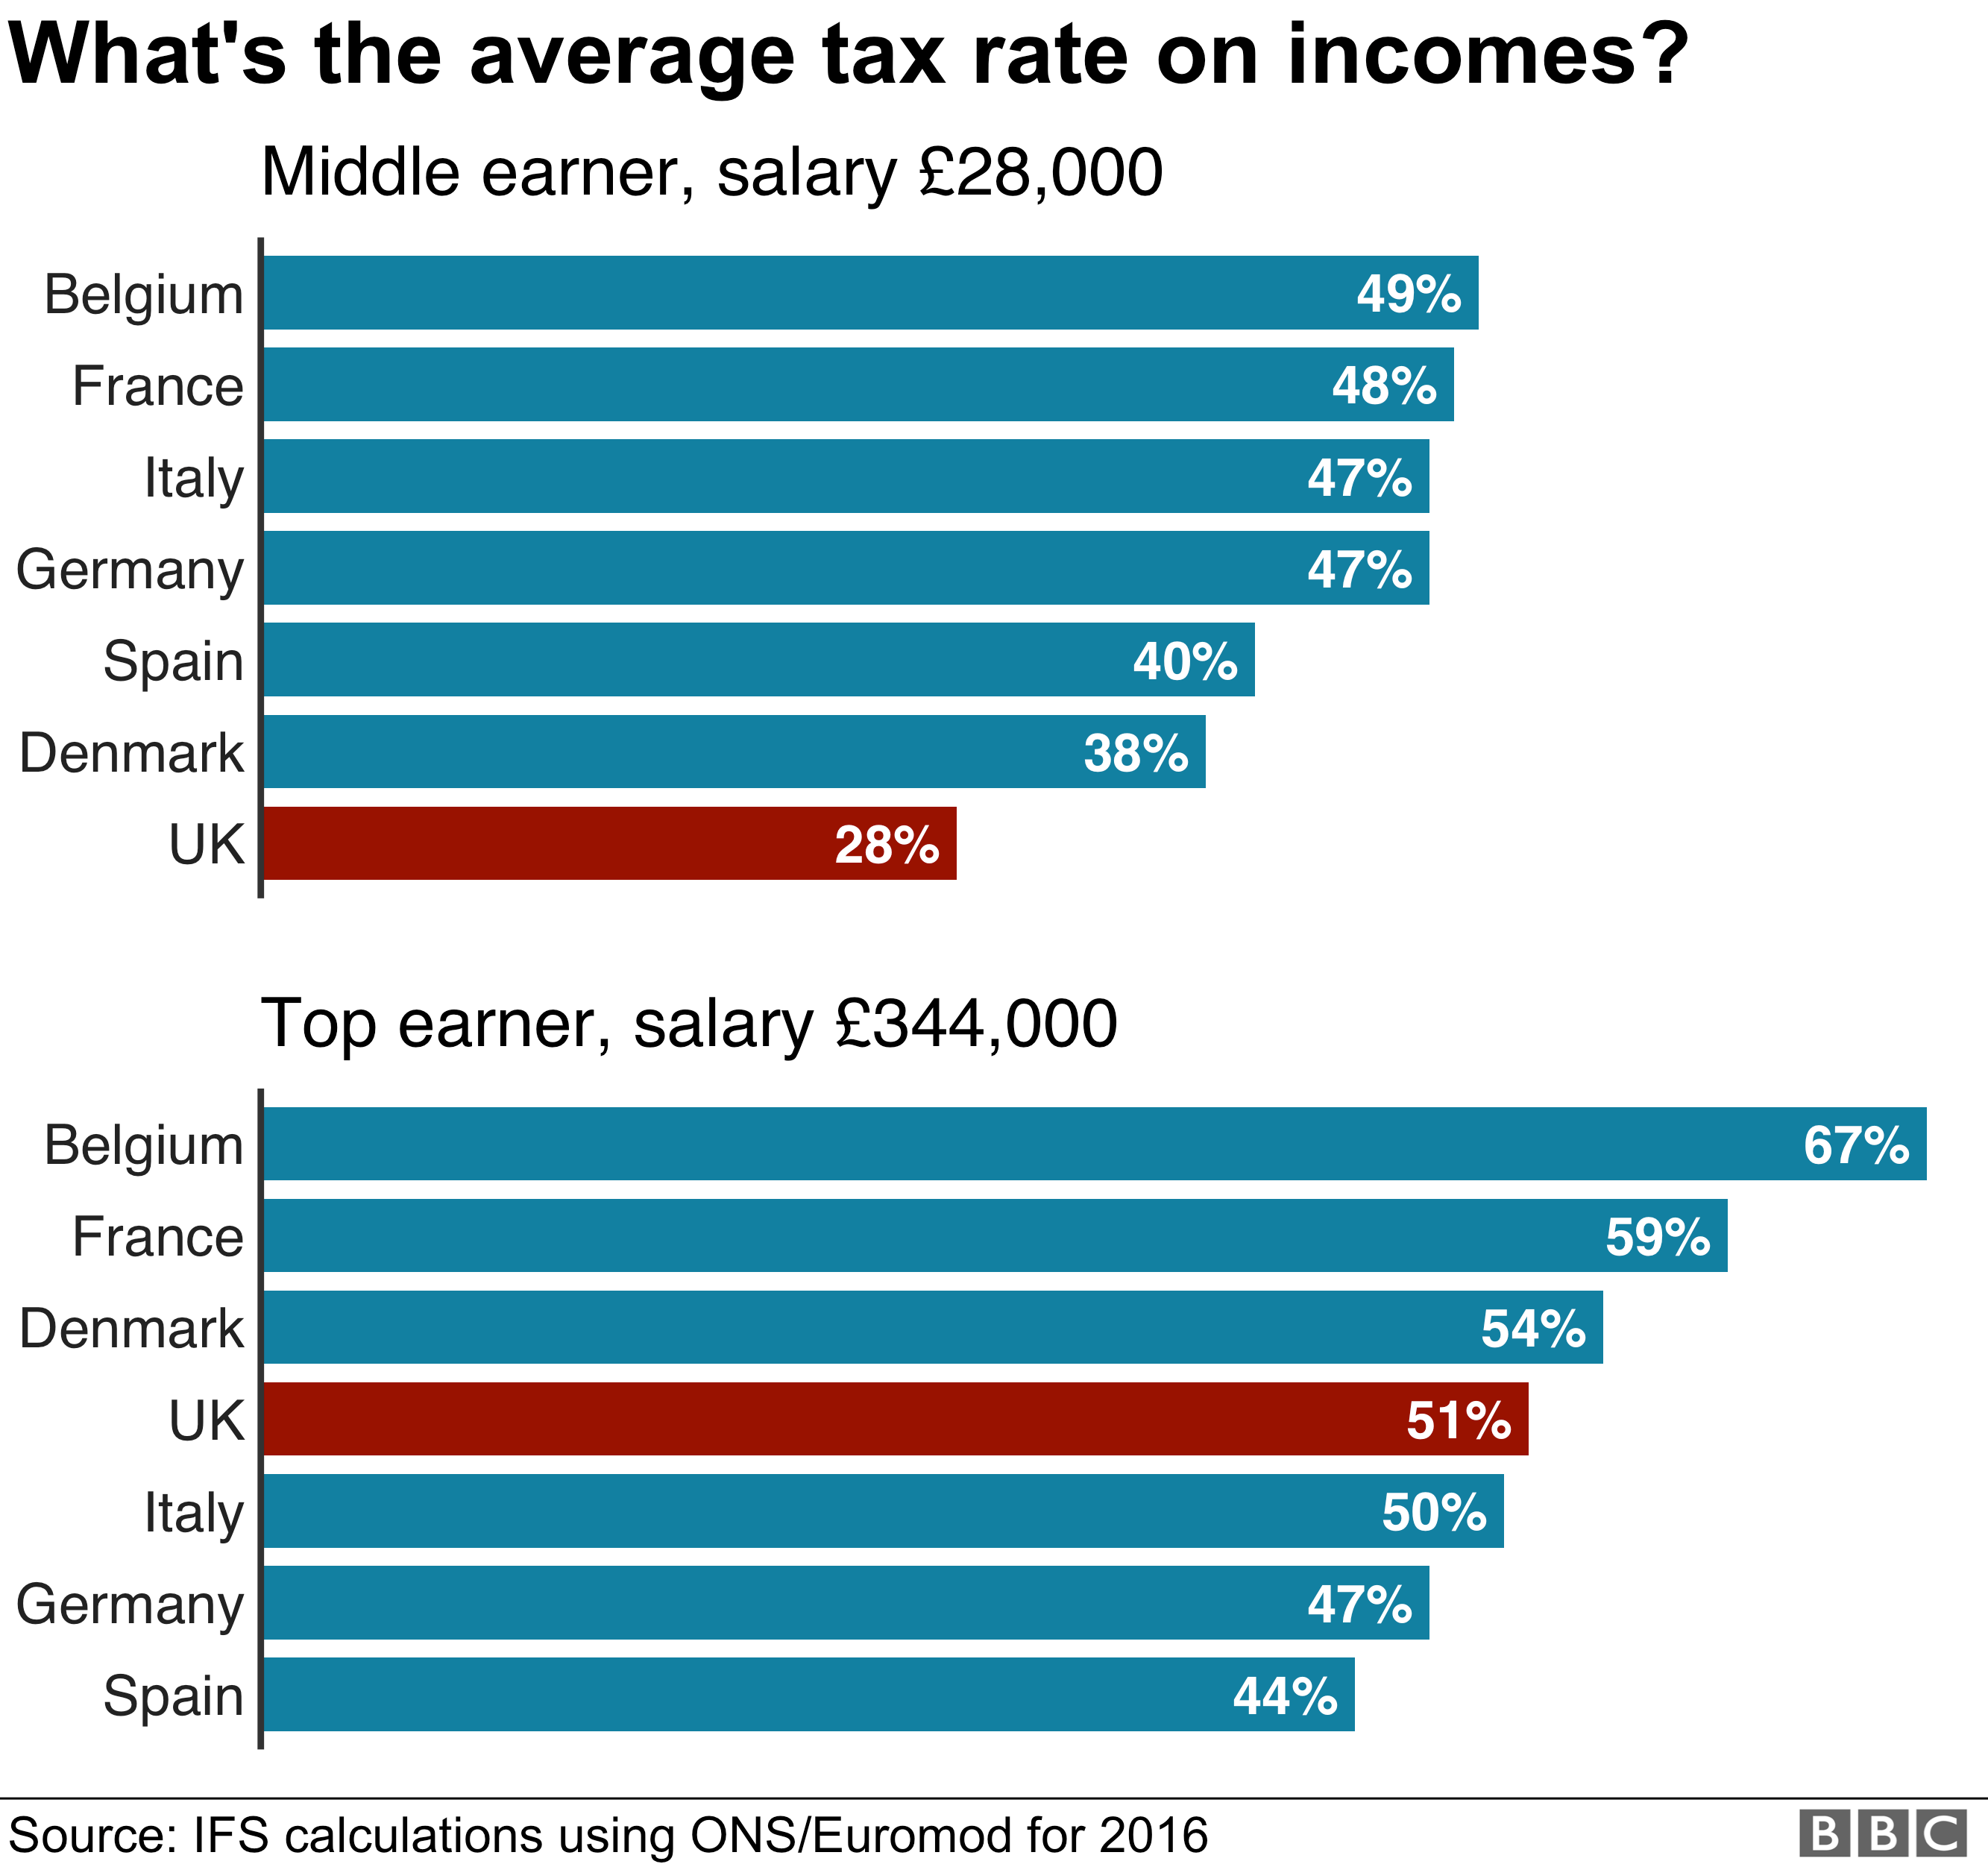 Tax Rates By Country Chart